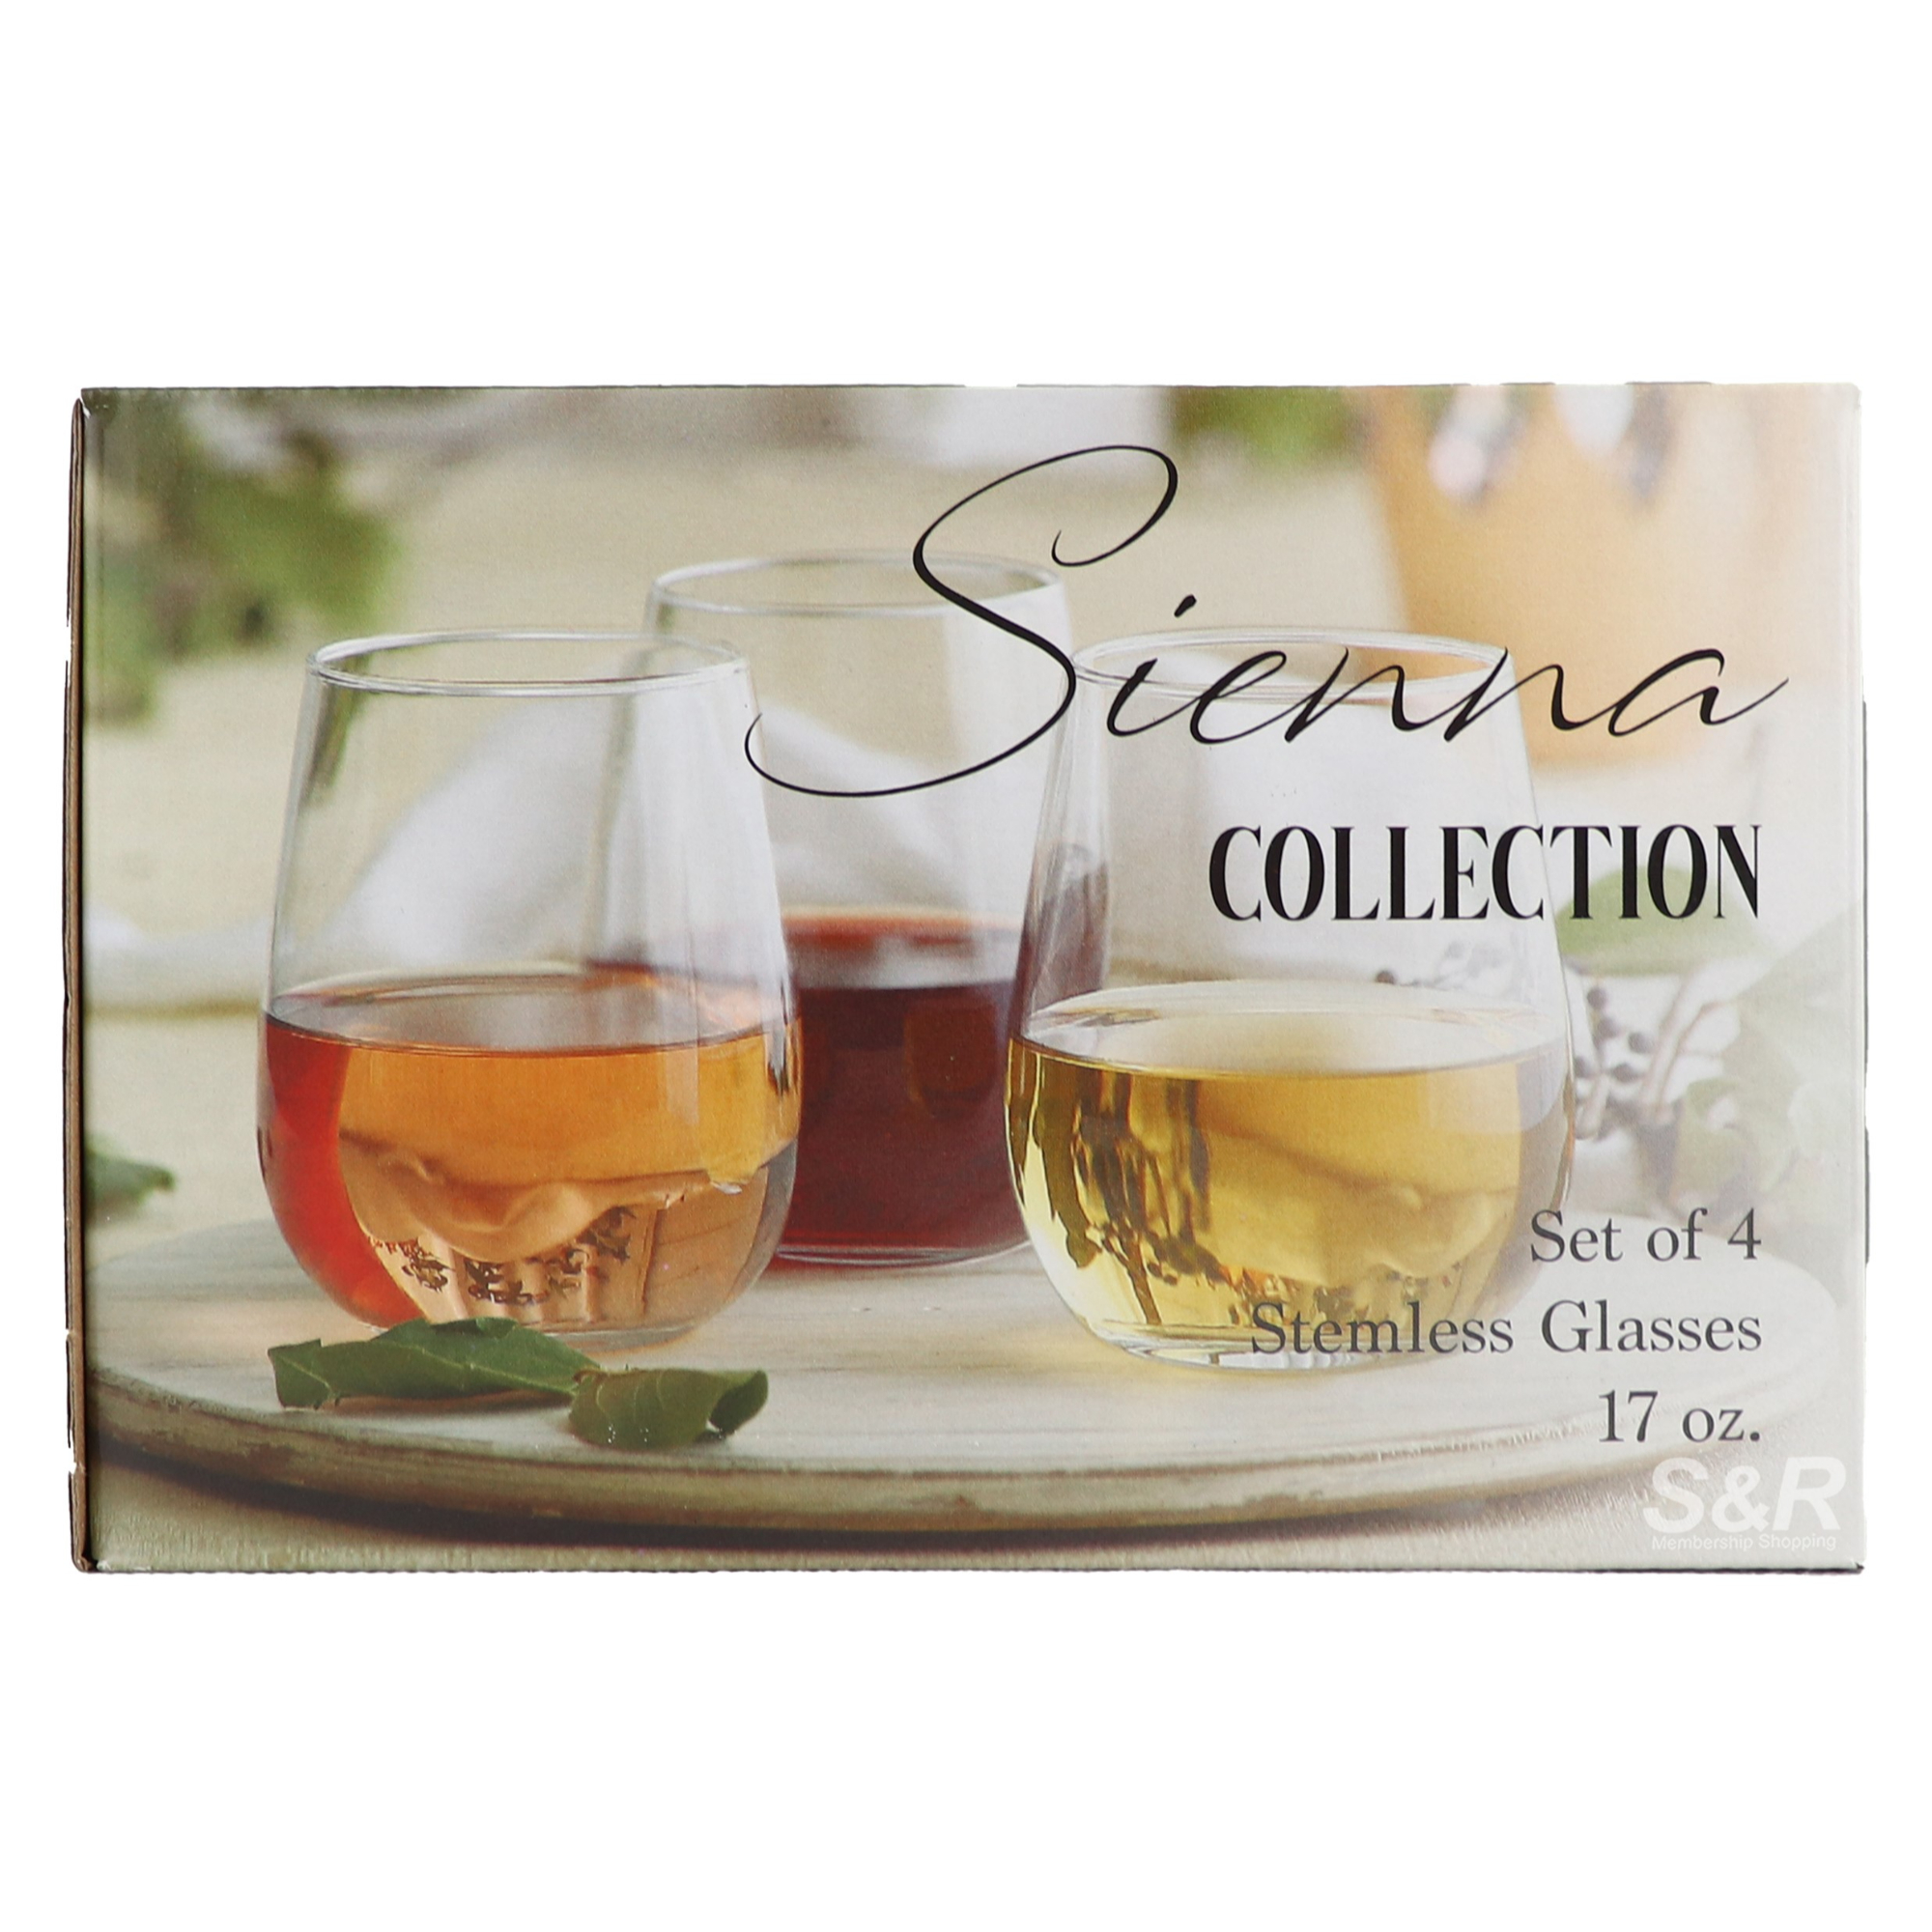 Sienna Collection Stemless Wine Glasses (502mL x 4pcs)